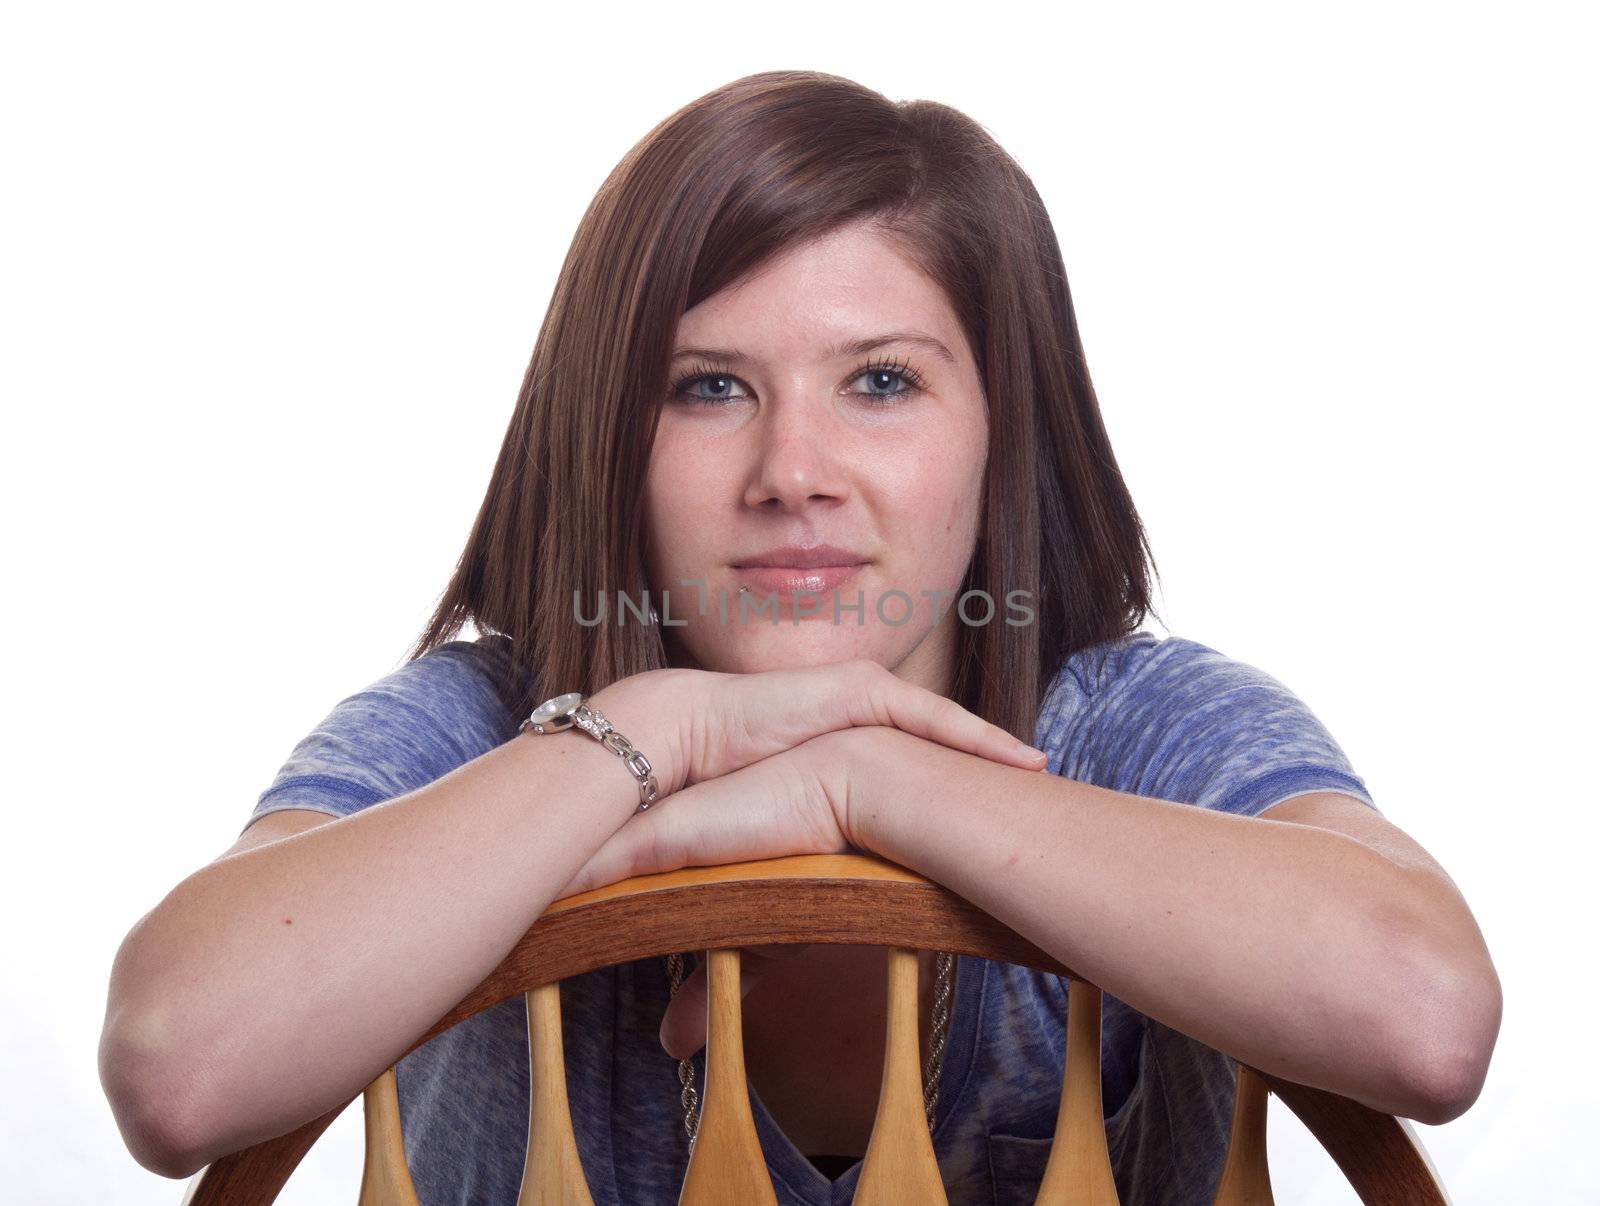 A beautiful gilr with long lashes.  Her arms are crossed over a chair.